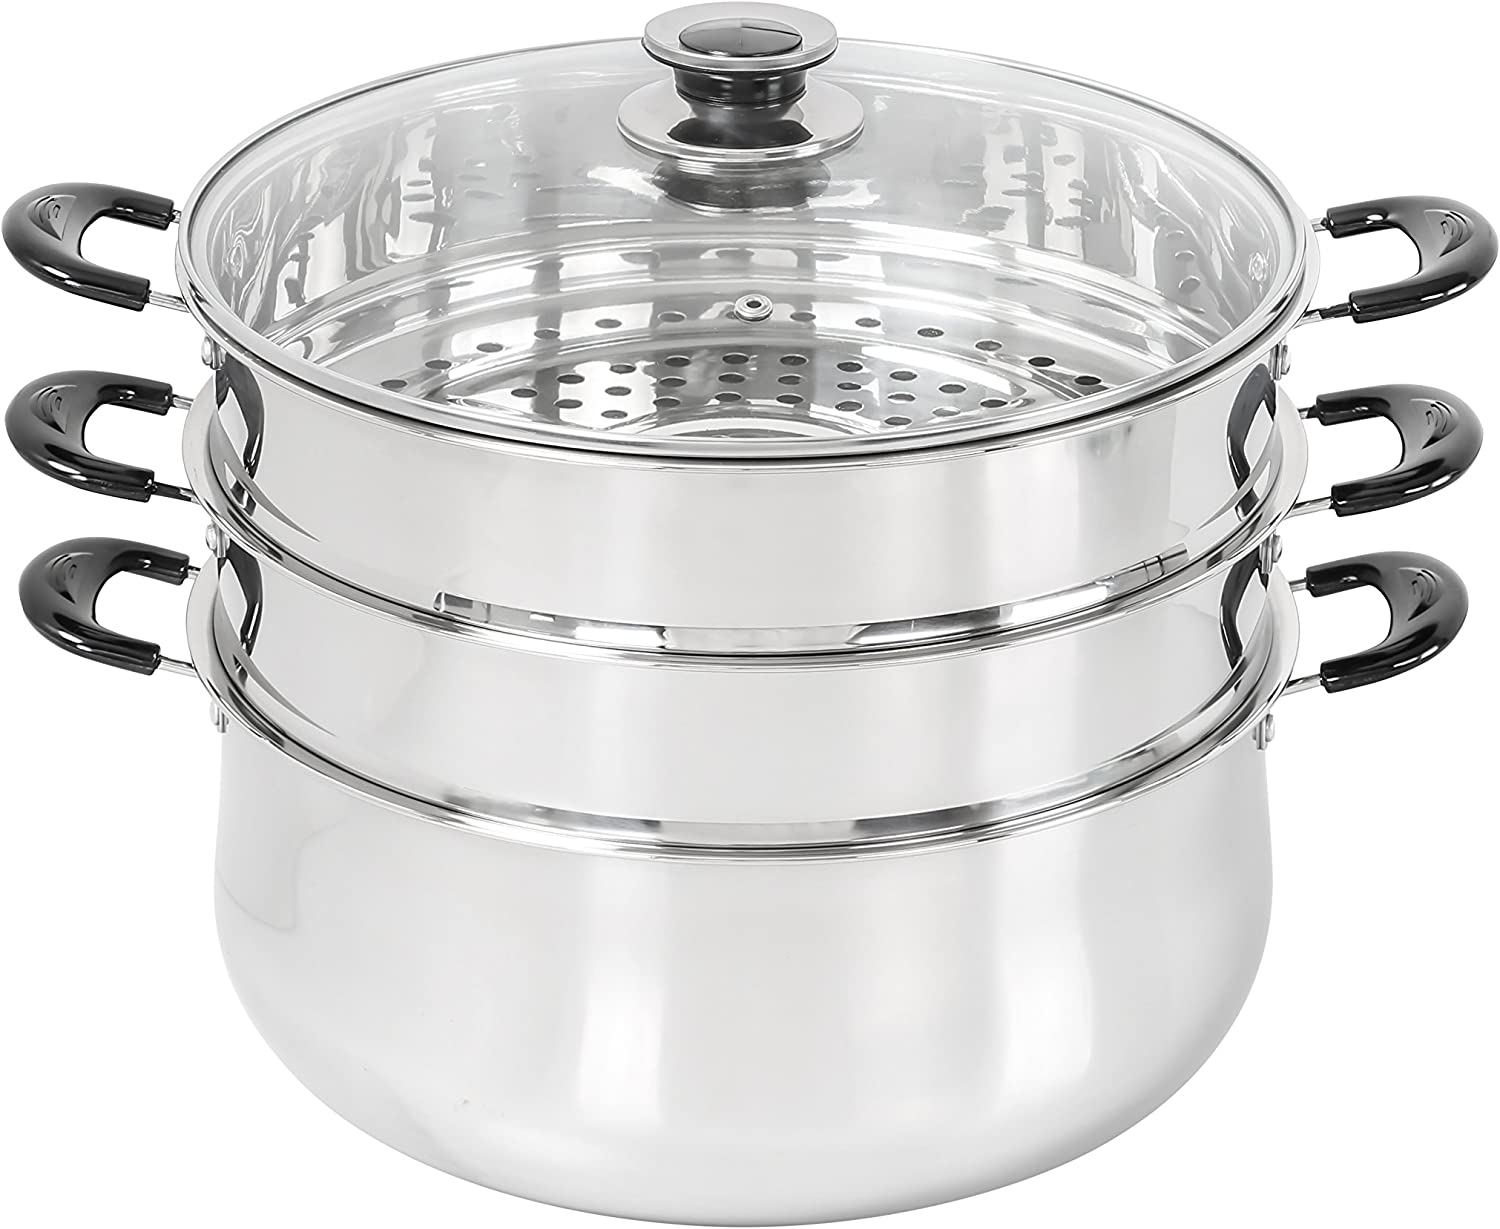 High Quality 430 stainless steel 3 layer cooking food steamer pot